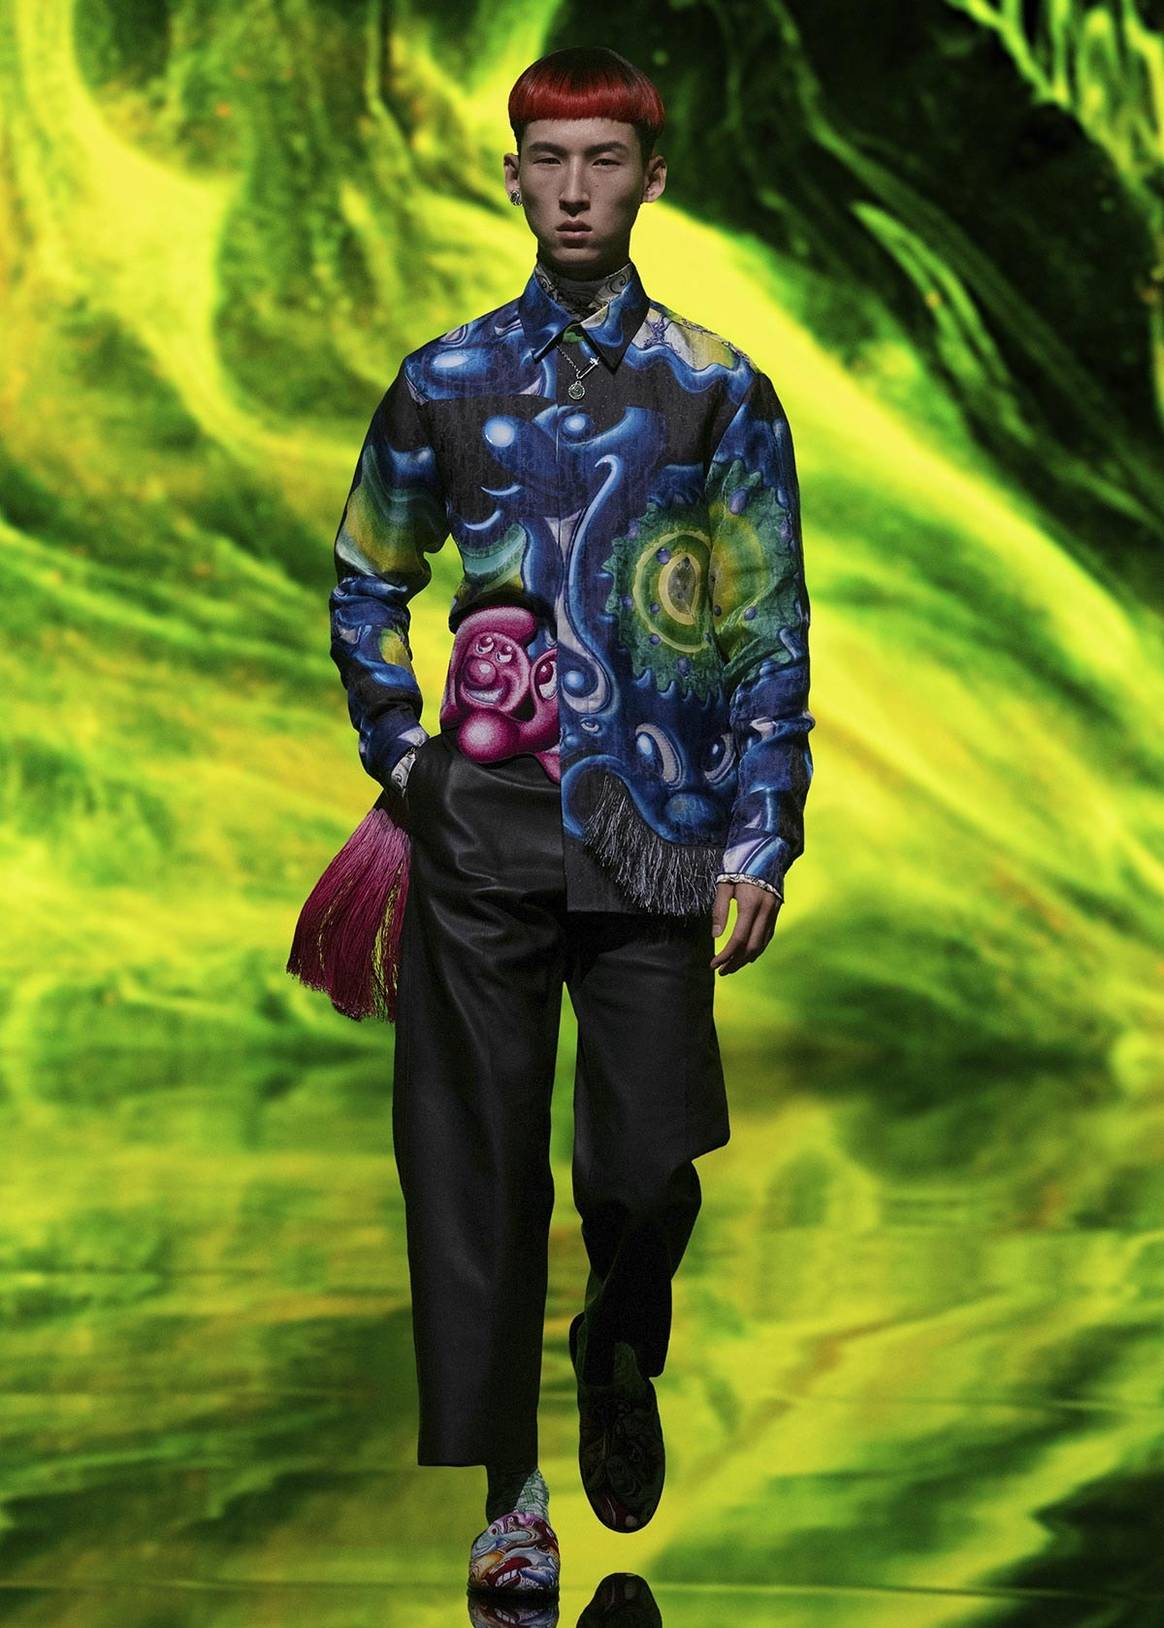 Dior unveils a joyful and psychedelic men's collection online